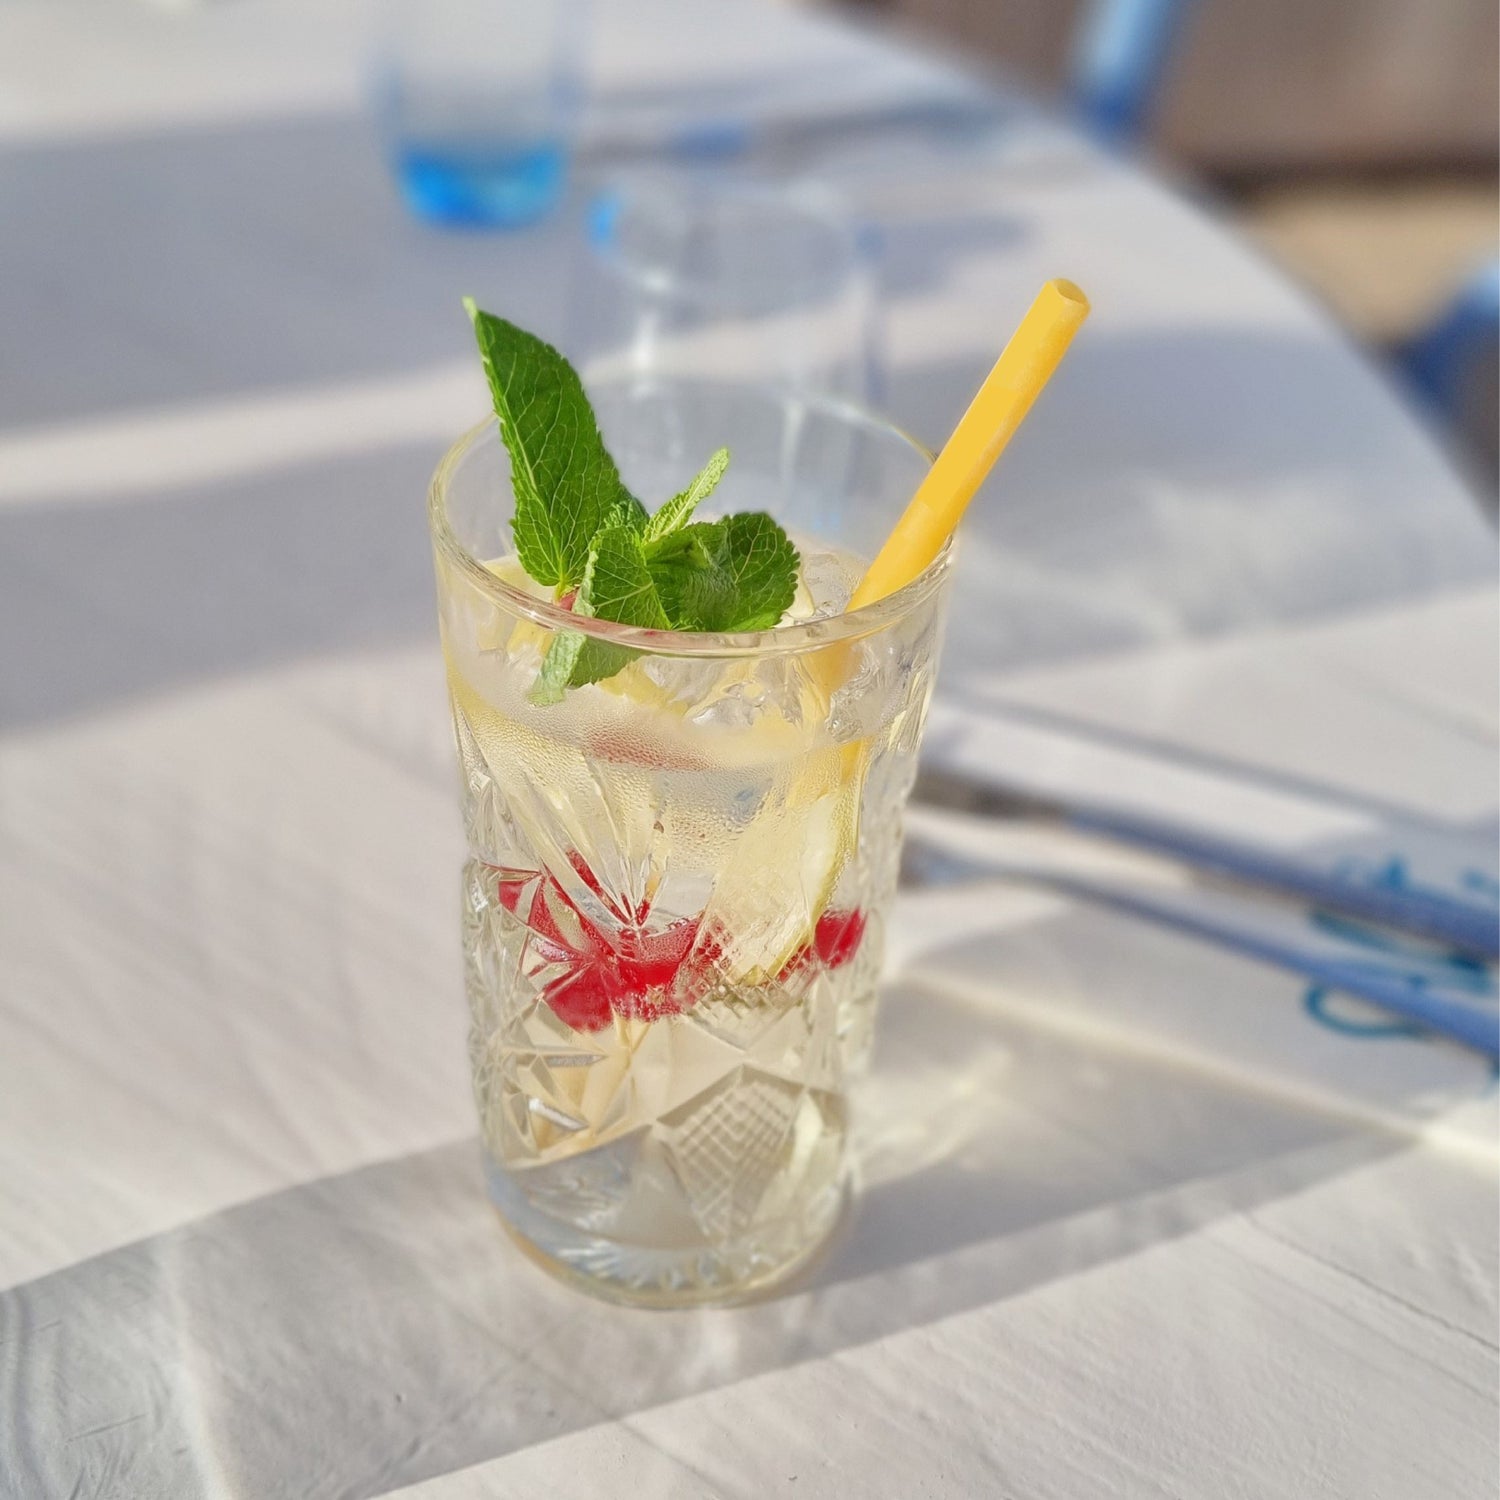 pasta straws inside a cocktail with mint and strawberries